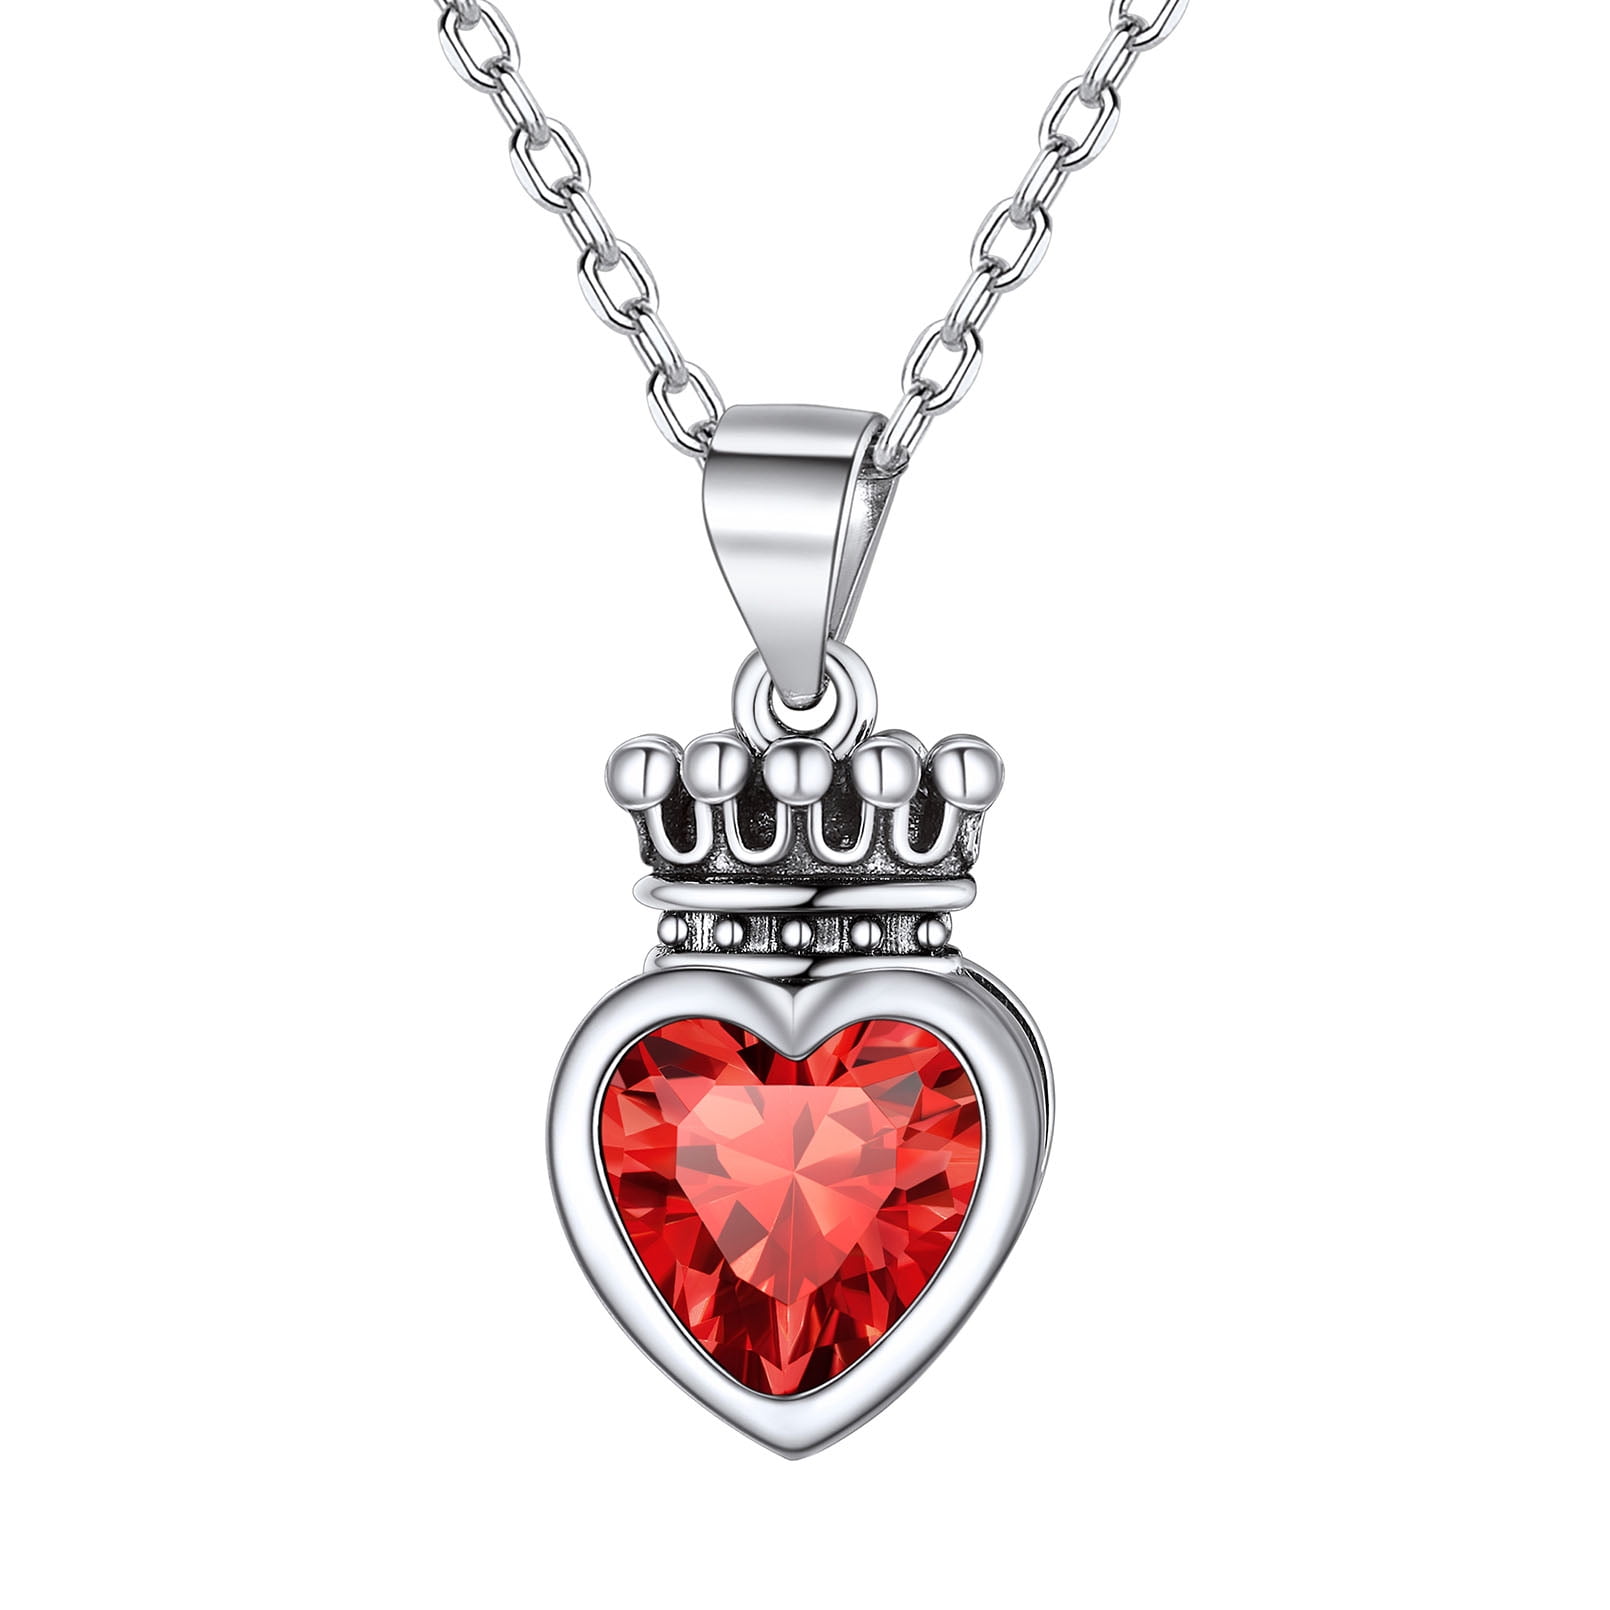 ChicSilver Princess Queen Crown Necklace for Women Girls Sterling